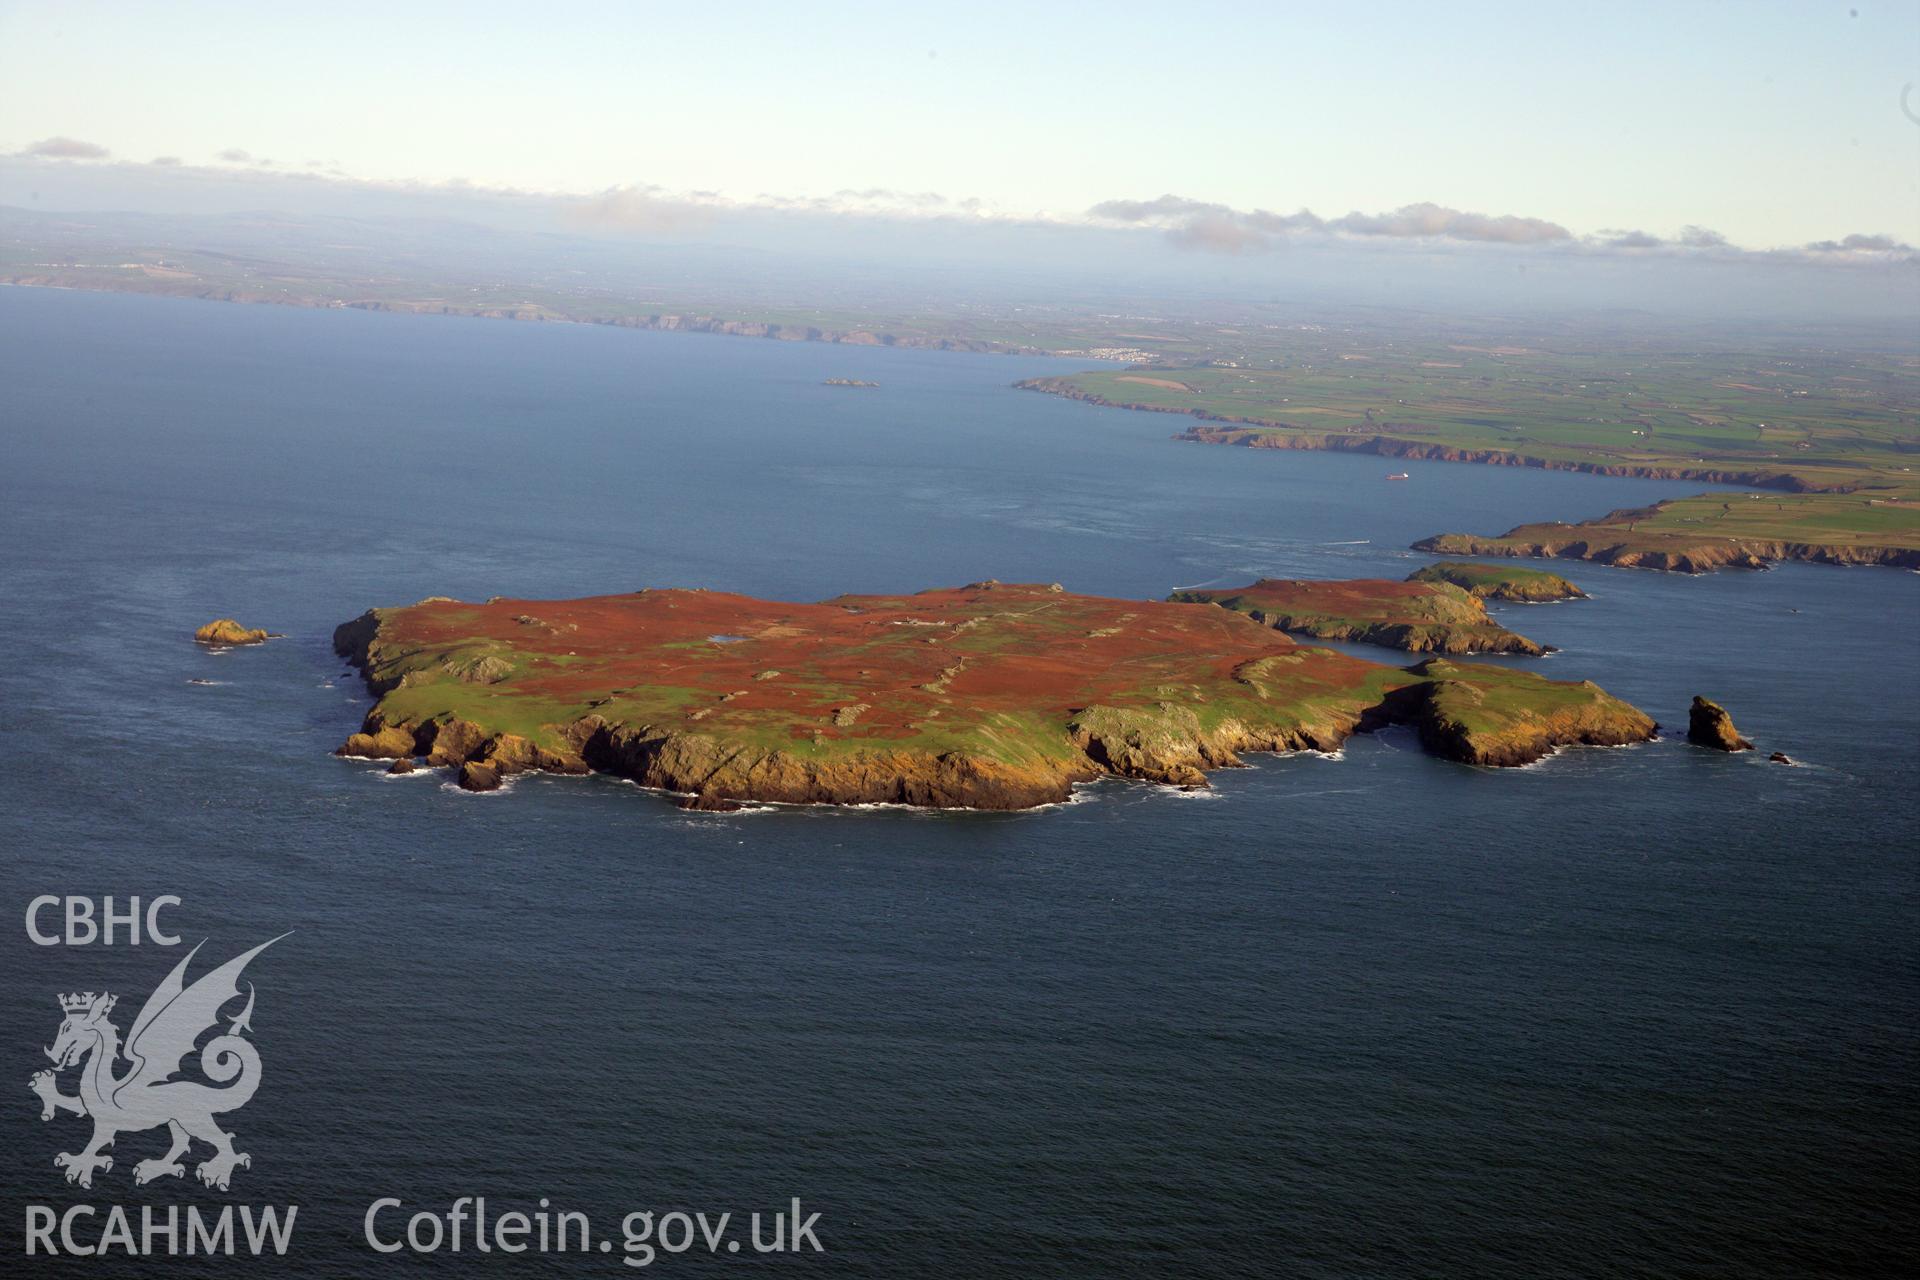 RCAHMW colour oblique photograph of Skokholm Island, viewed from the west. Taken by O. Davies & T. Driver on 22/11/2013.